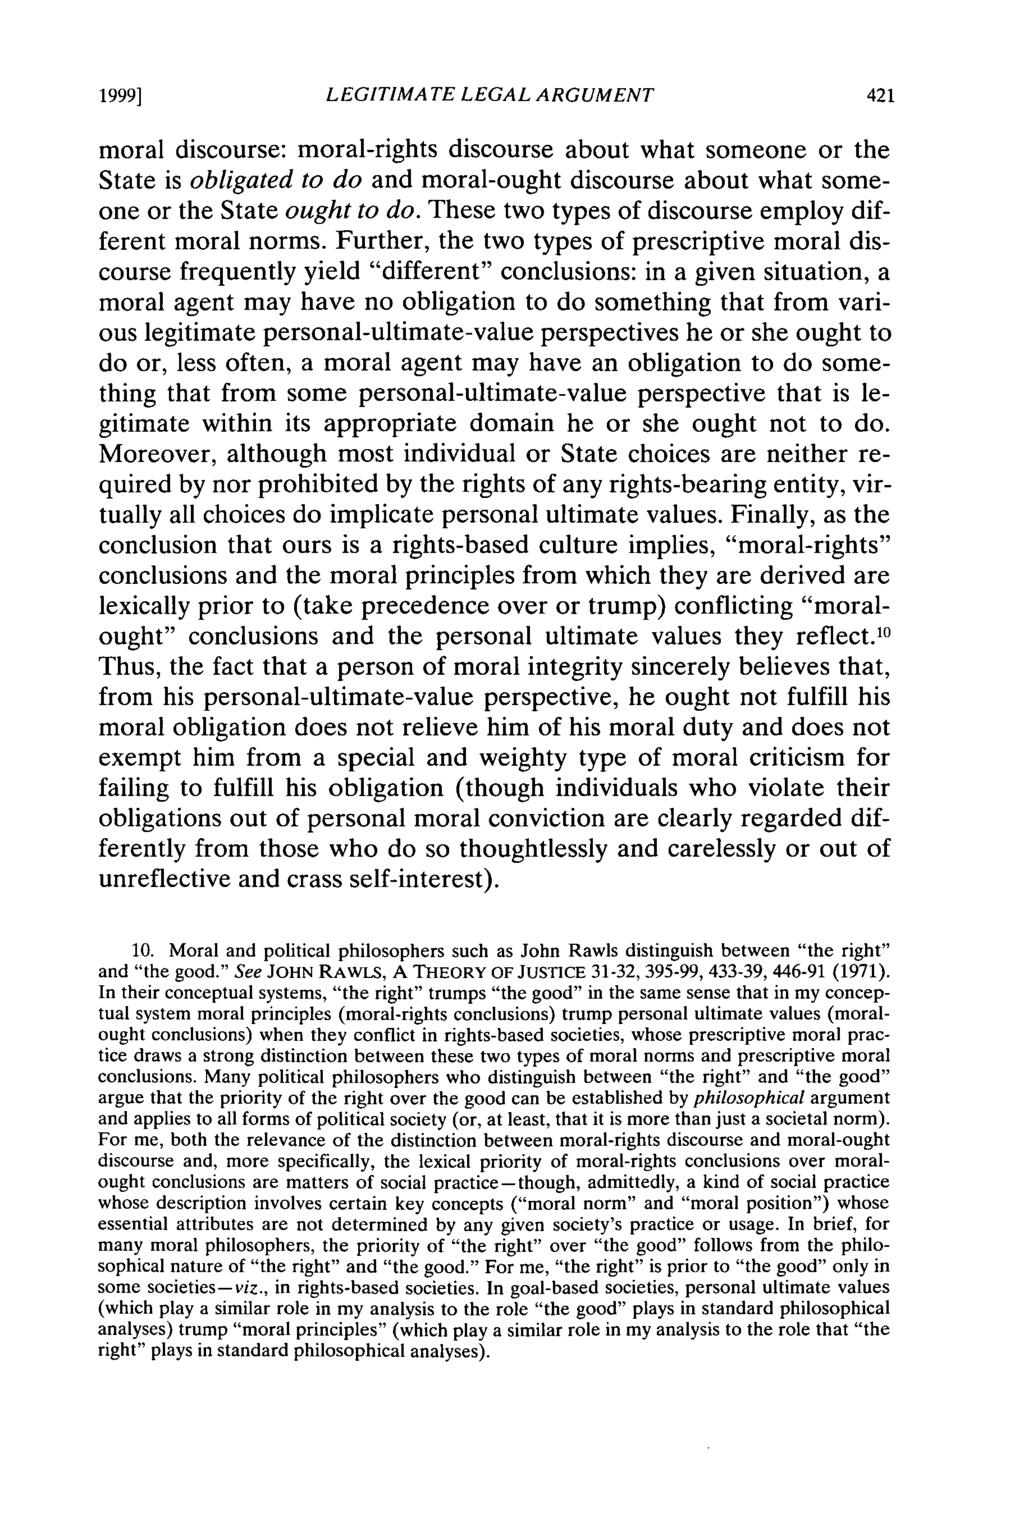 1999] LEGITIMATE LEGAL ARGUMENT moral discourse: moral-rights discourse about what someone or the State is obligated to do and moral-ought discourse about what someone or the State ought to do.